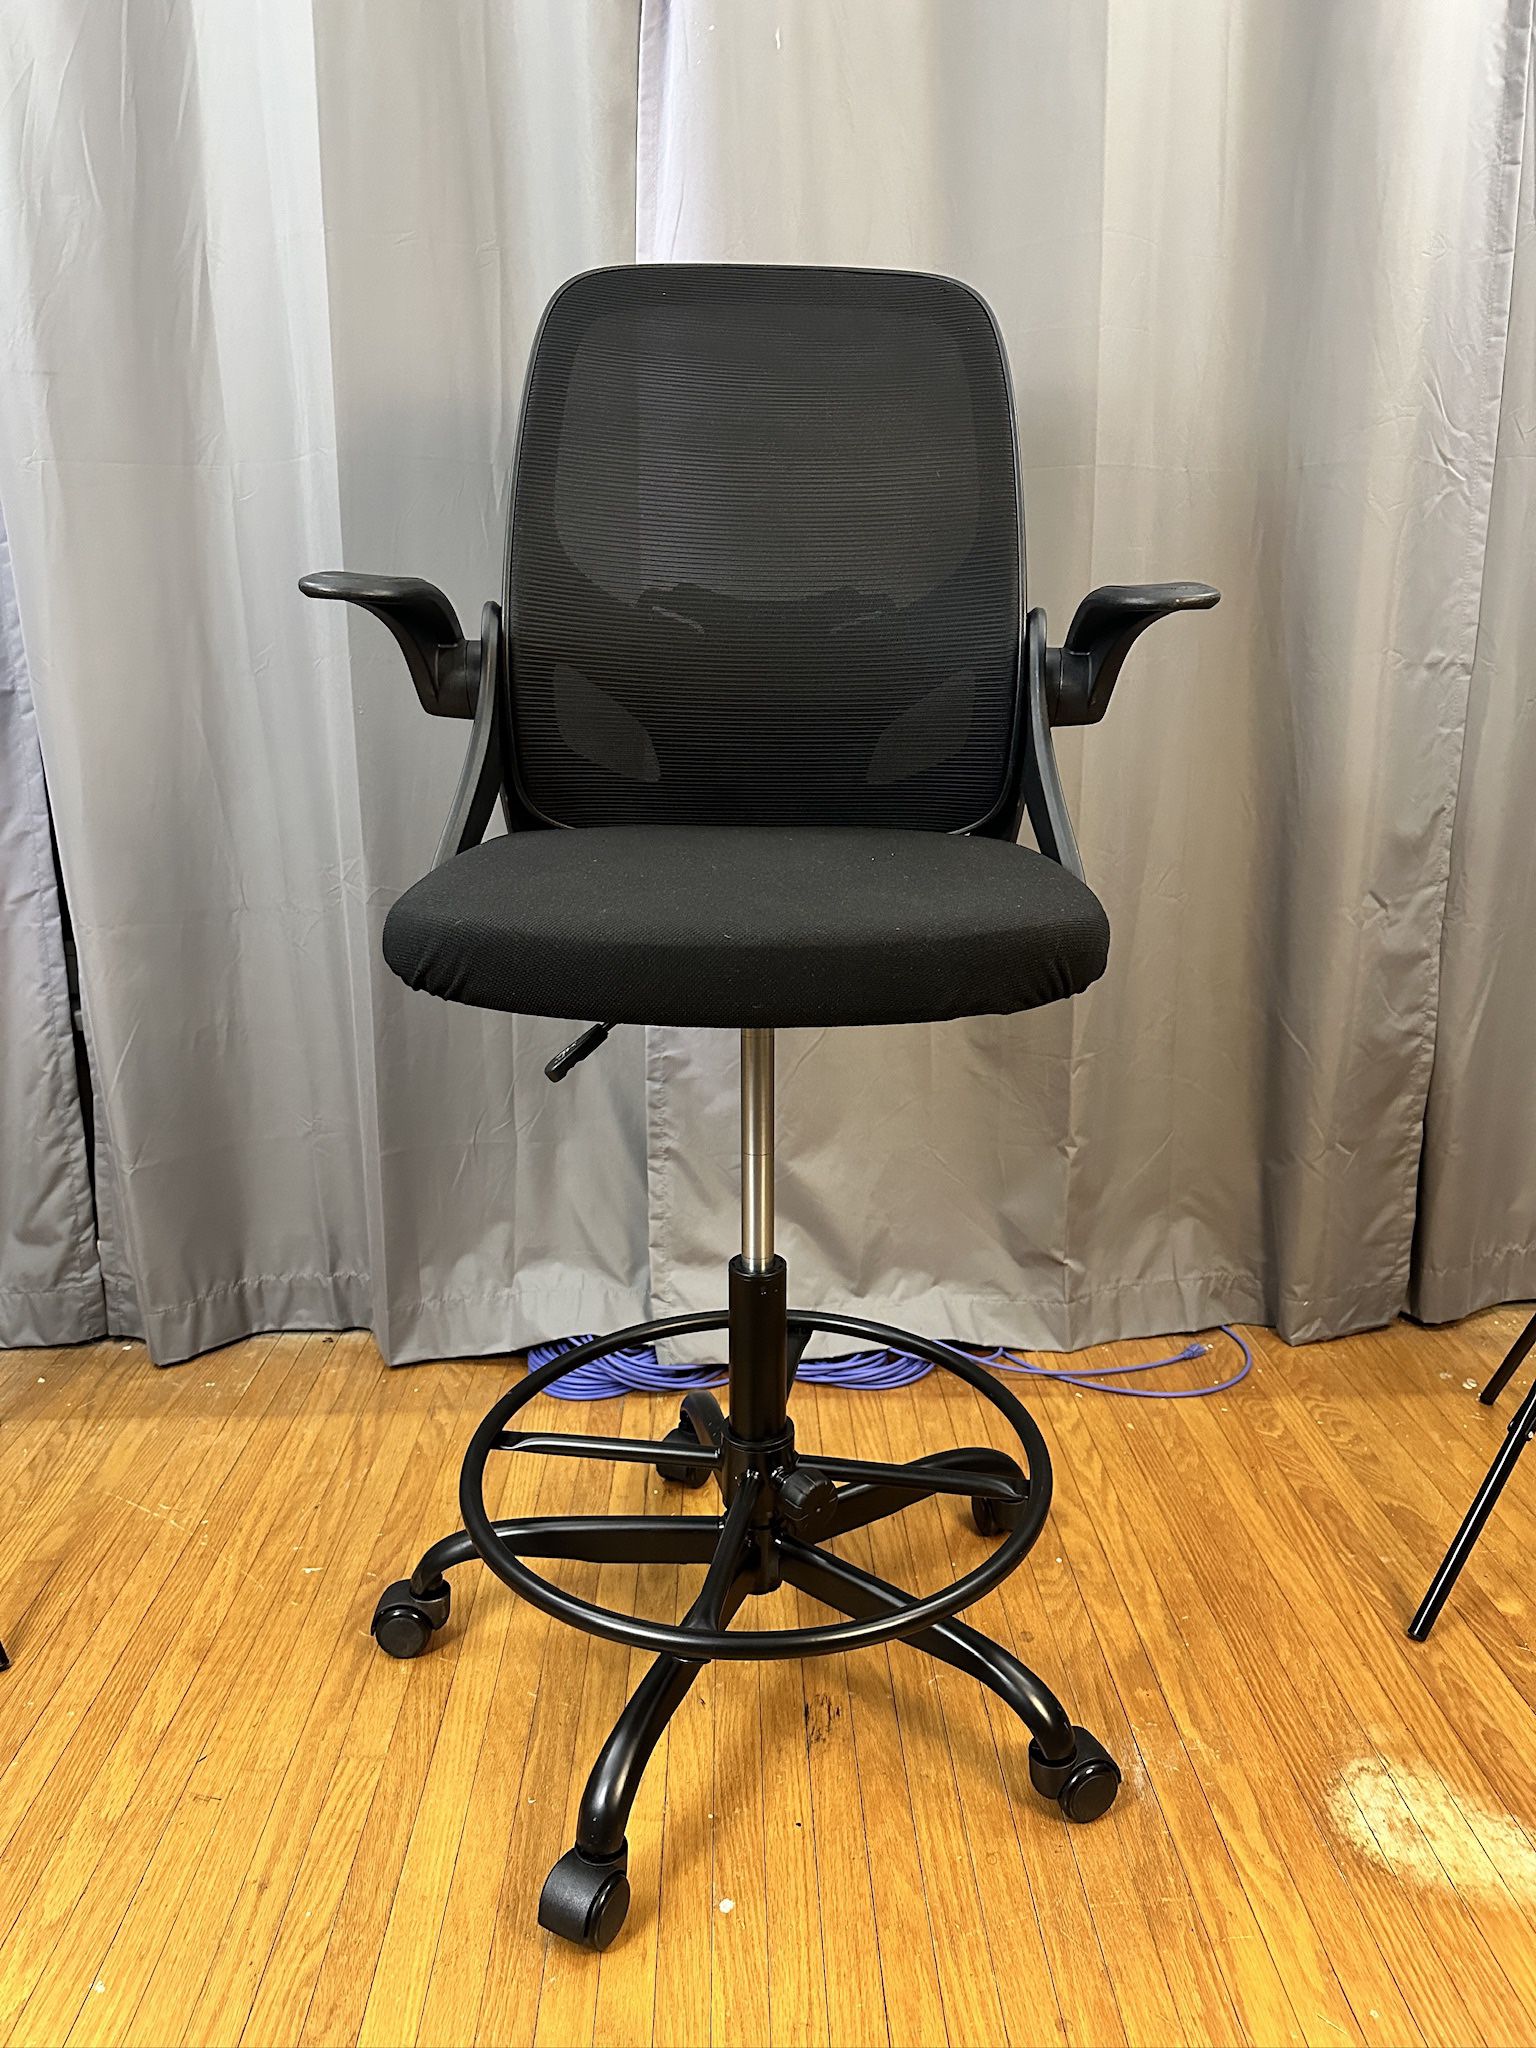 Kensaker Drafting Chair With Footrest Ring & Lumbar Support